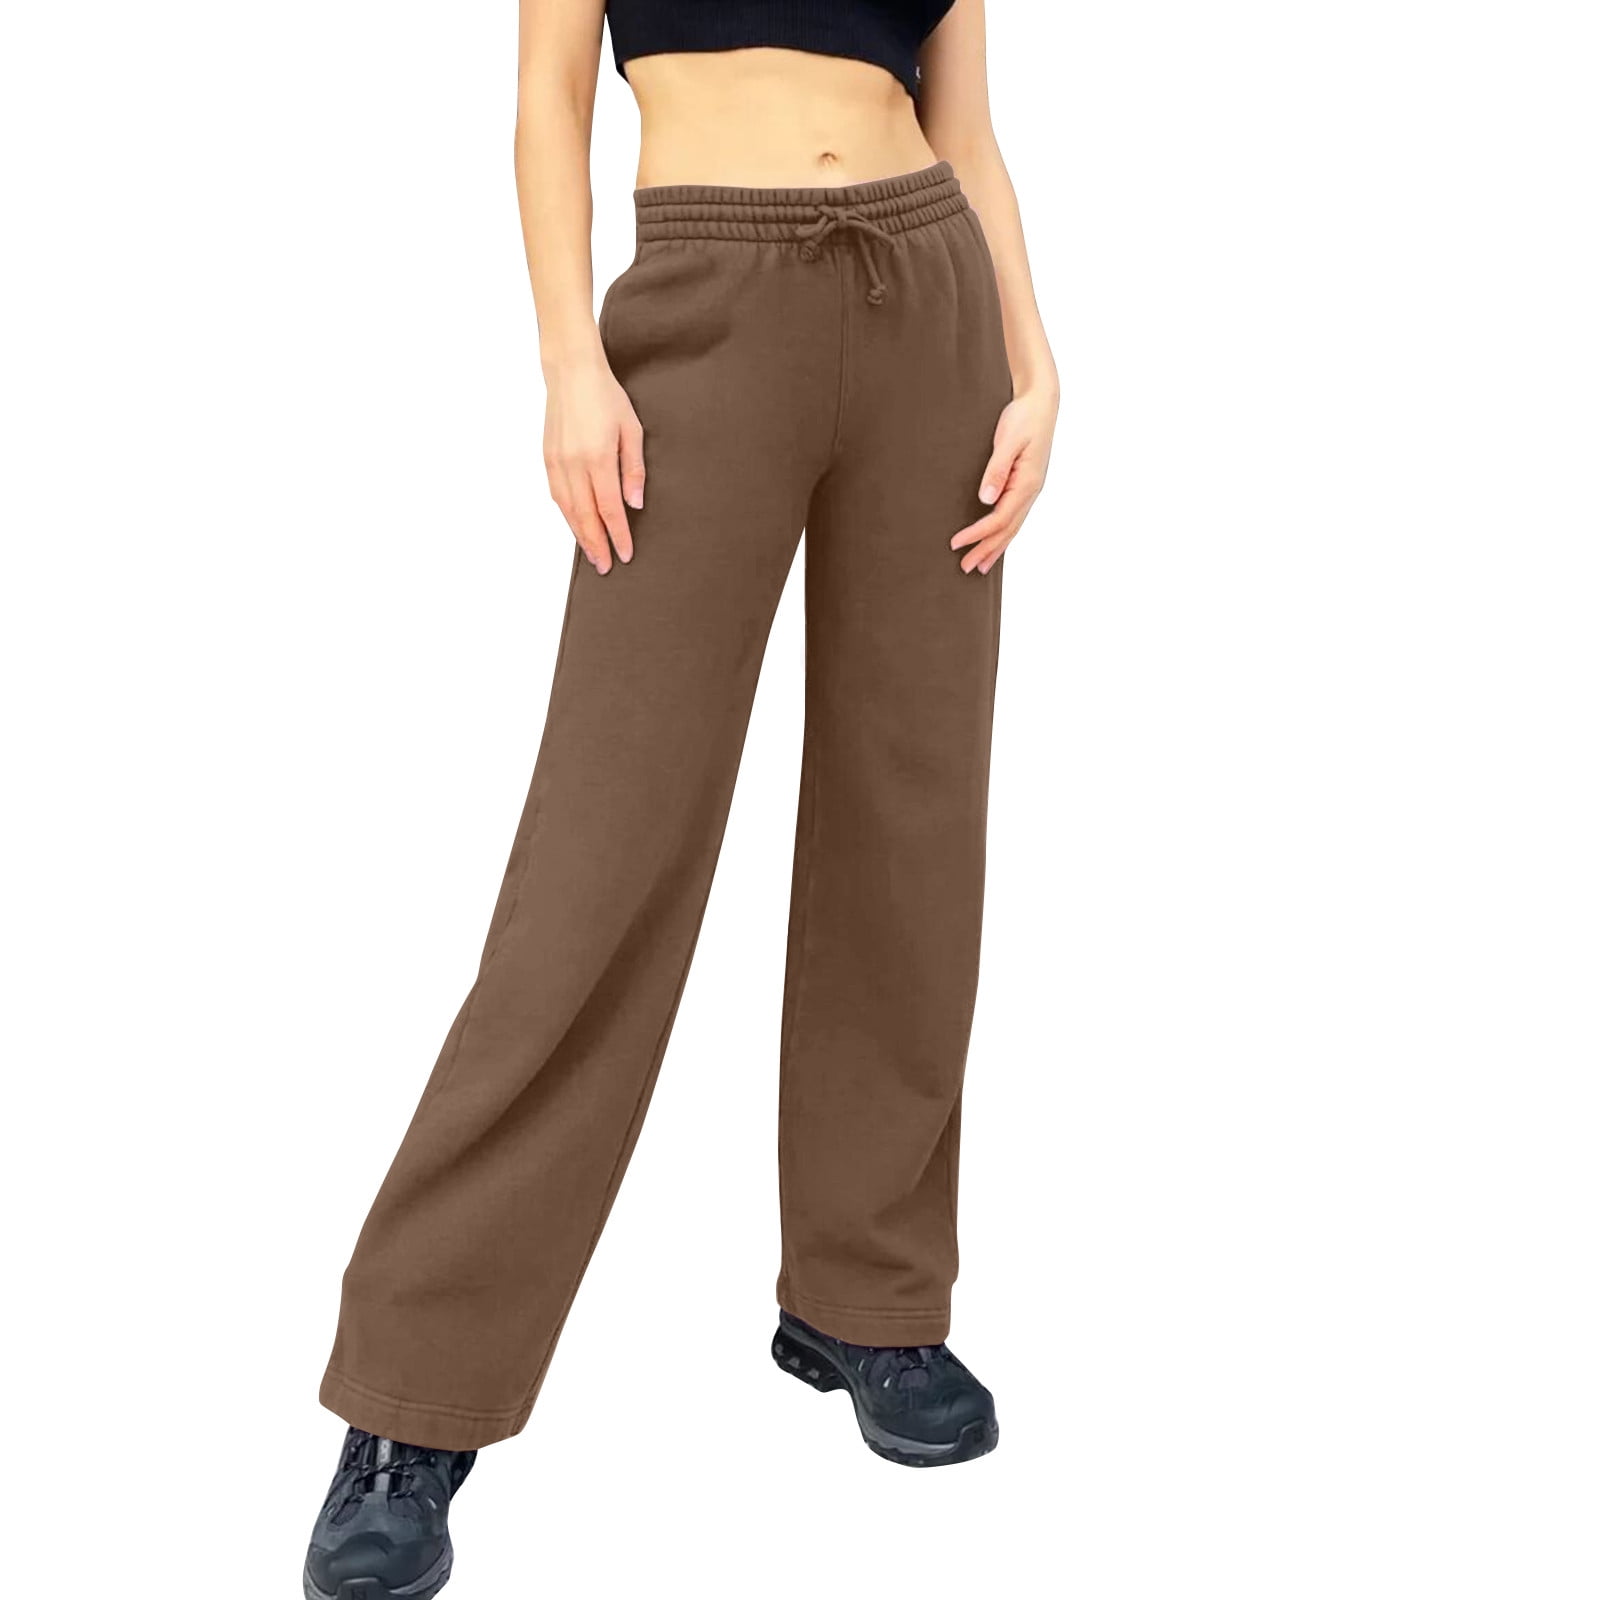 Susanny Tall Sweatpants for Women Fleece Lined Straight Leg with Pockets  Drawstring Lounge Pants High Waisted Loose Fit Baggy Petite Cute Sweat Pants  for Girls Brown 2XL 